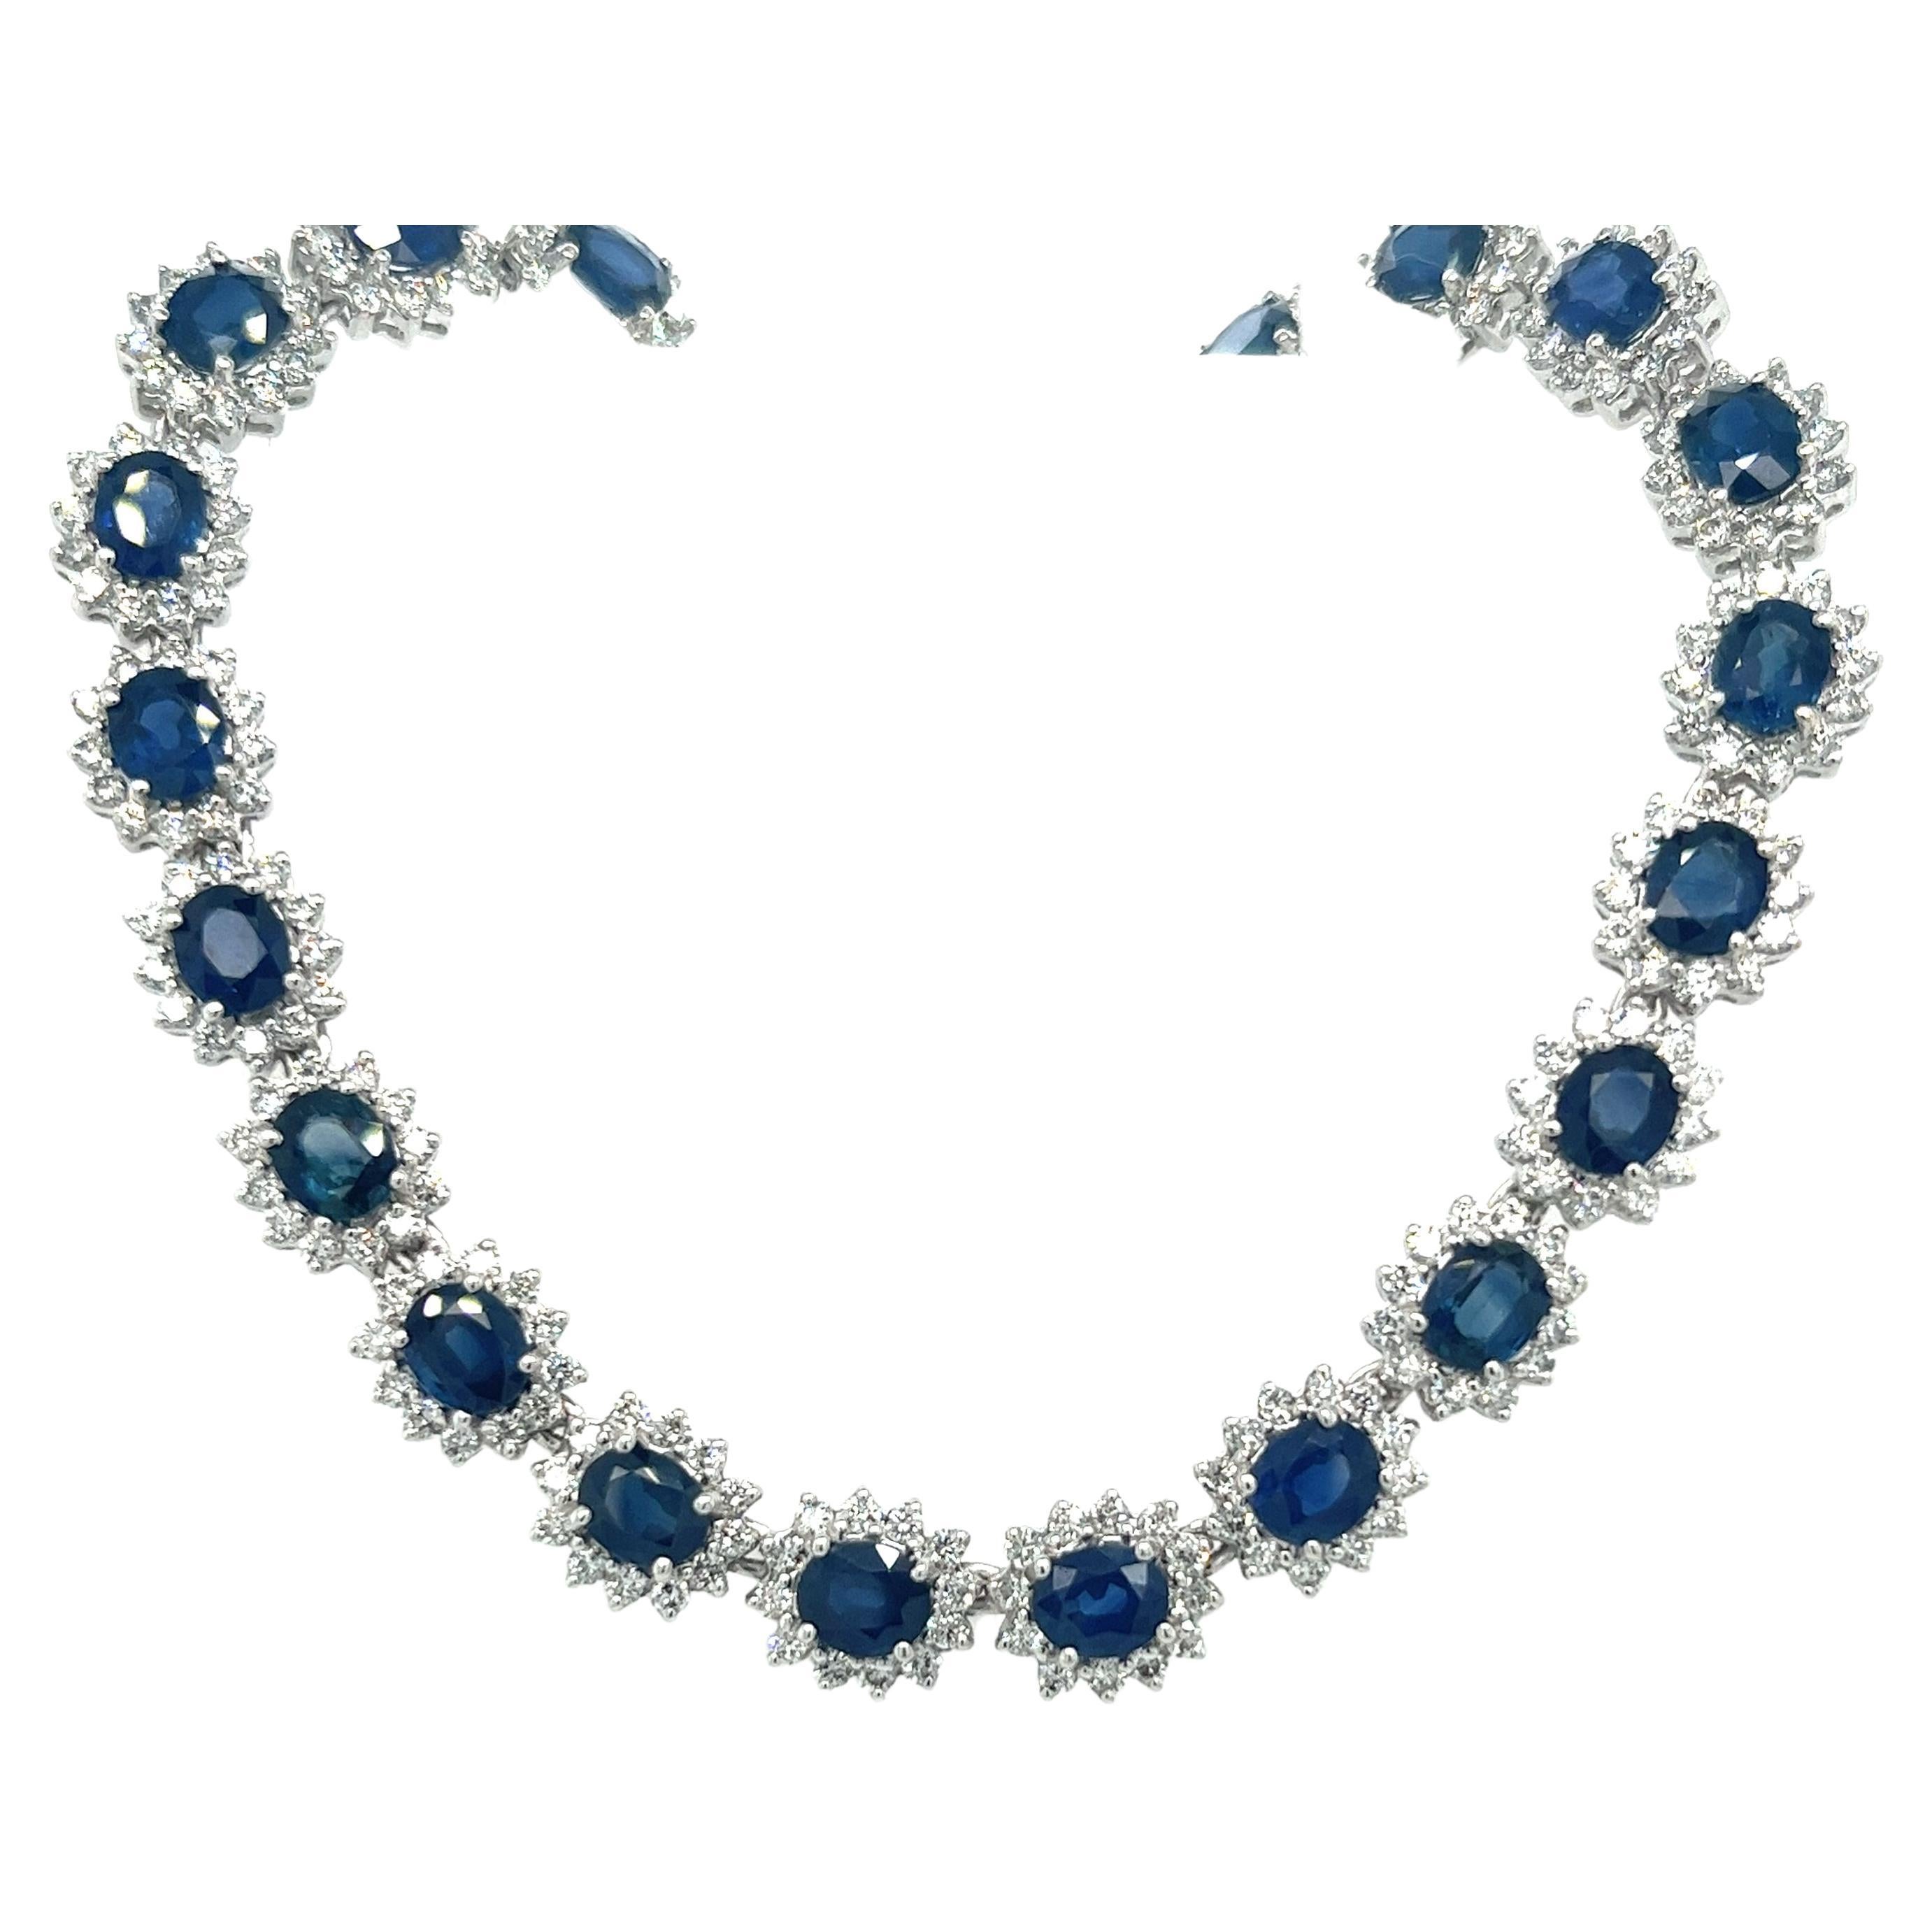 36 Carat Oval Cut Blue Sapphire & Diamond Halo Choker Necklace in 18k White Gold For Sale